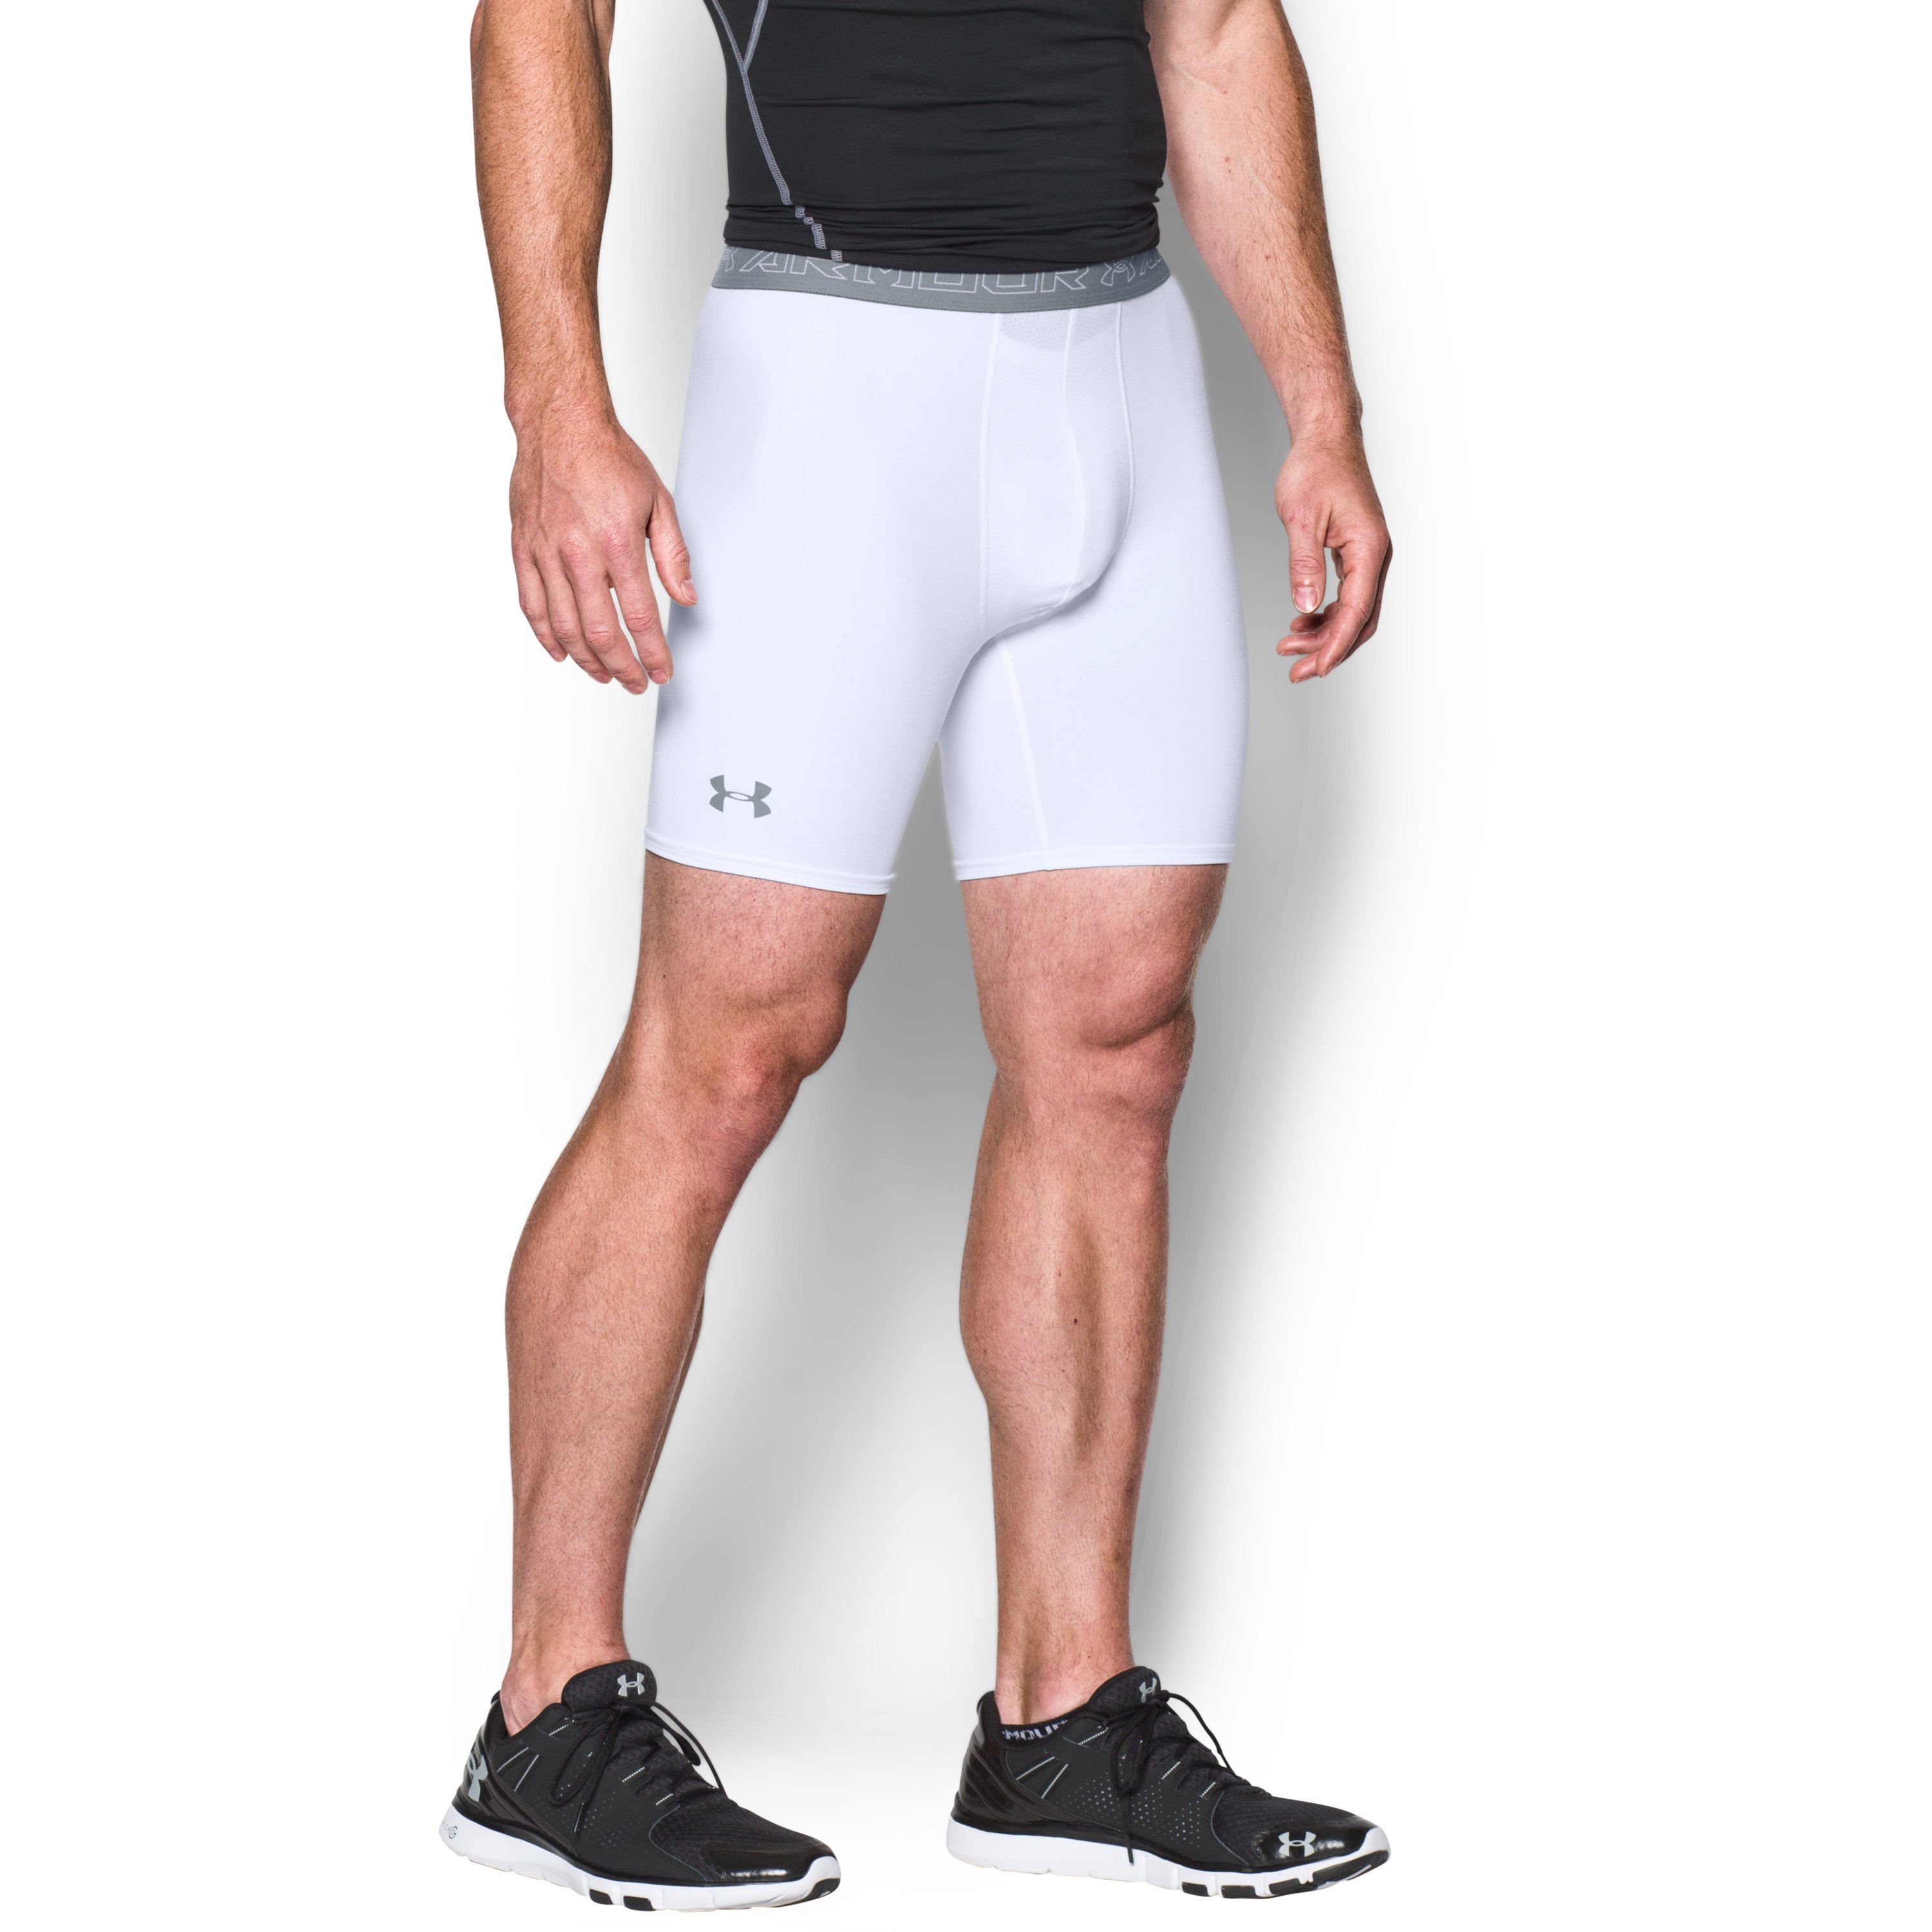 Groin Saver  UnderArmour Compression Shorts [HD] 